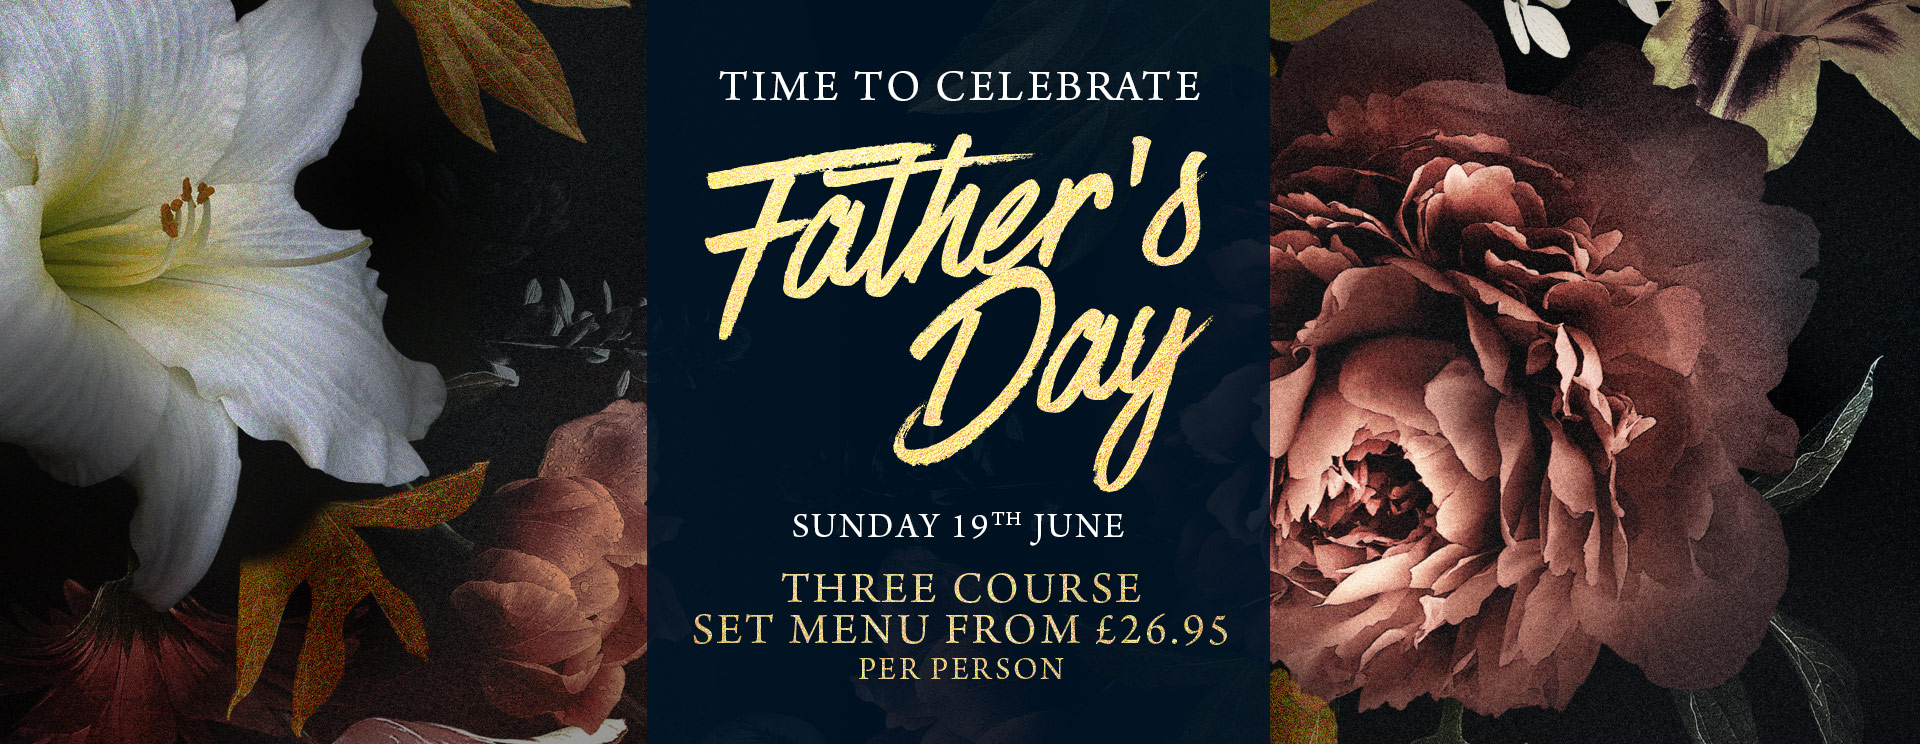 Fathers Day at The George